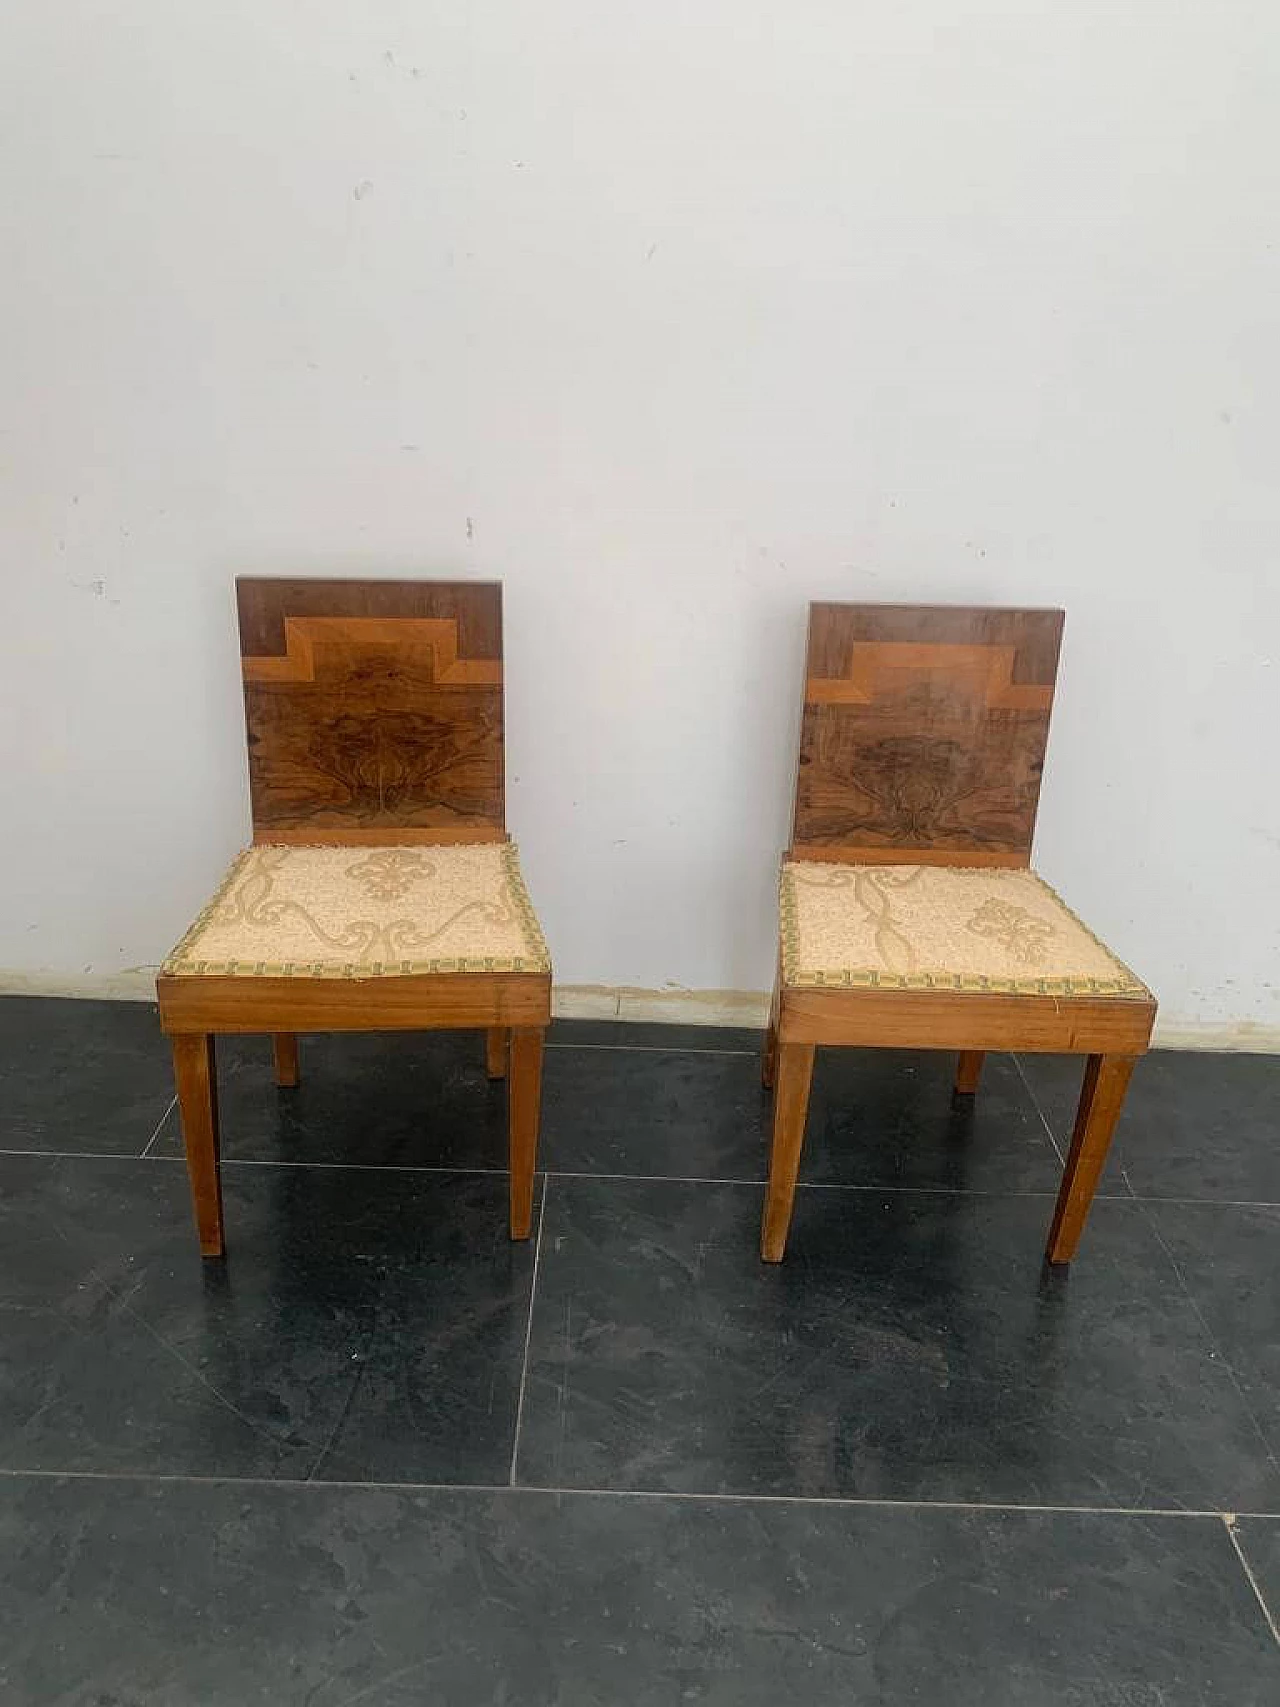 Pair of wooden chairs by Franco Vezzani, 1930s 2